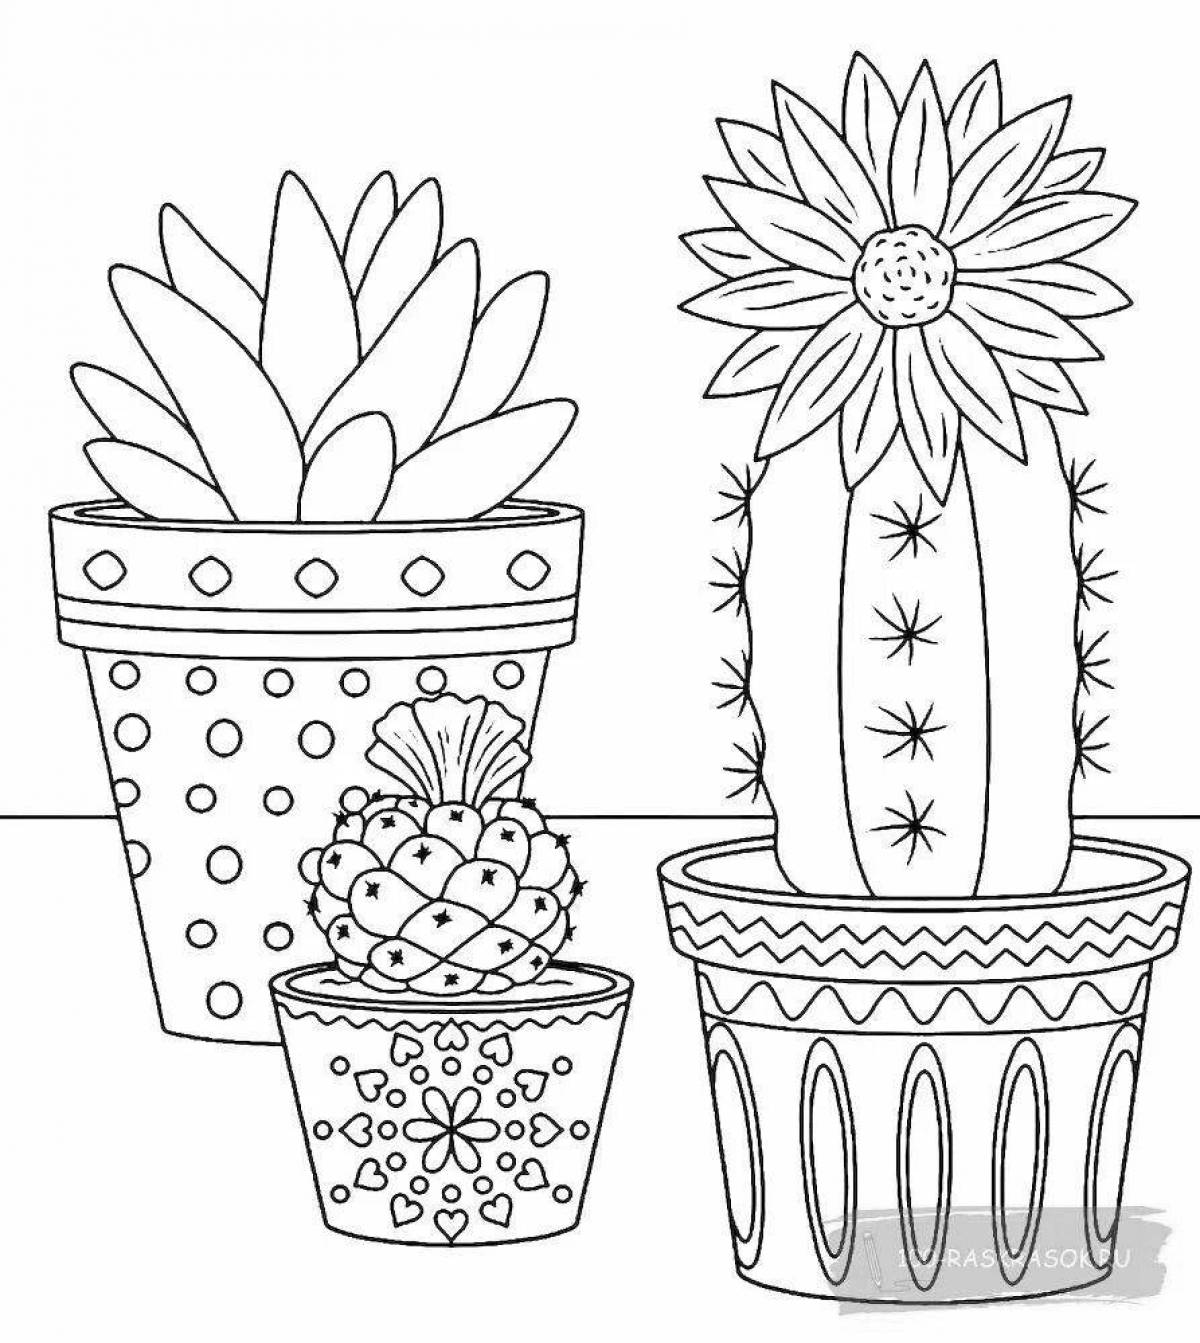 Coloring book magic flower pot for kids